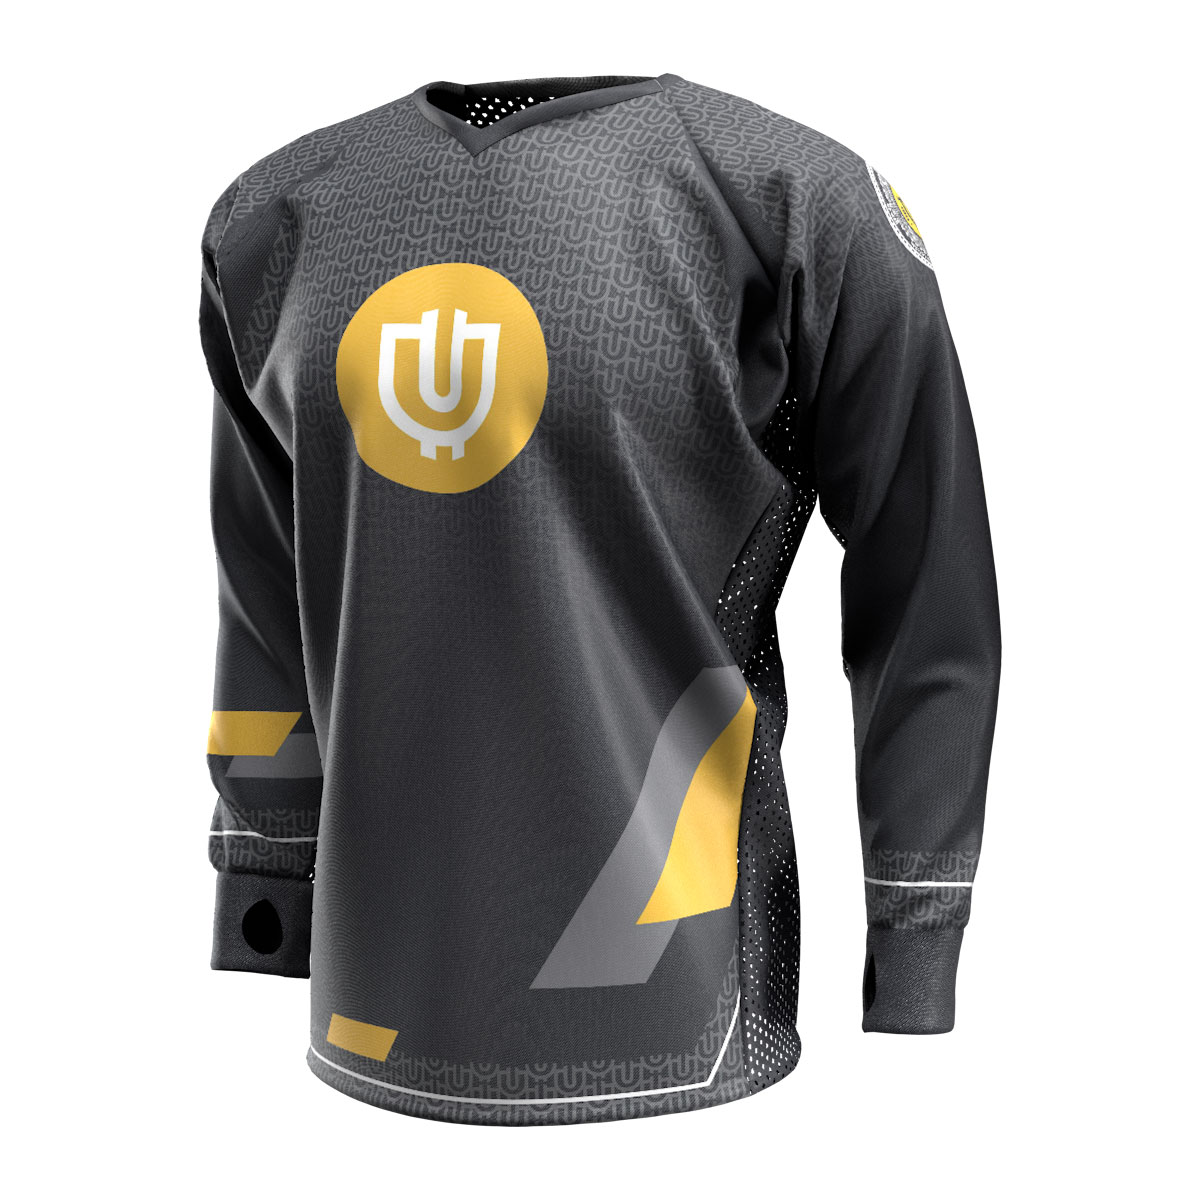 Just got my first jersey! Decided to go with Social Paintball, and